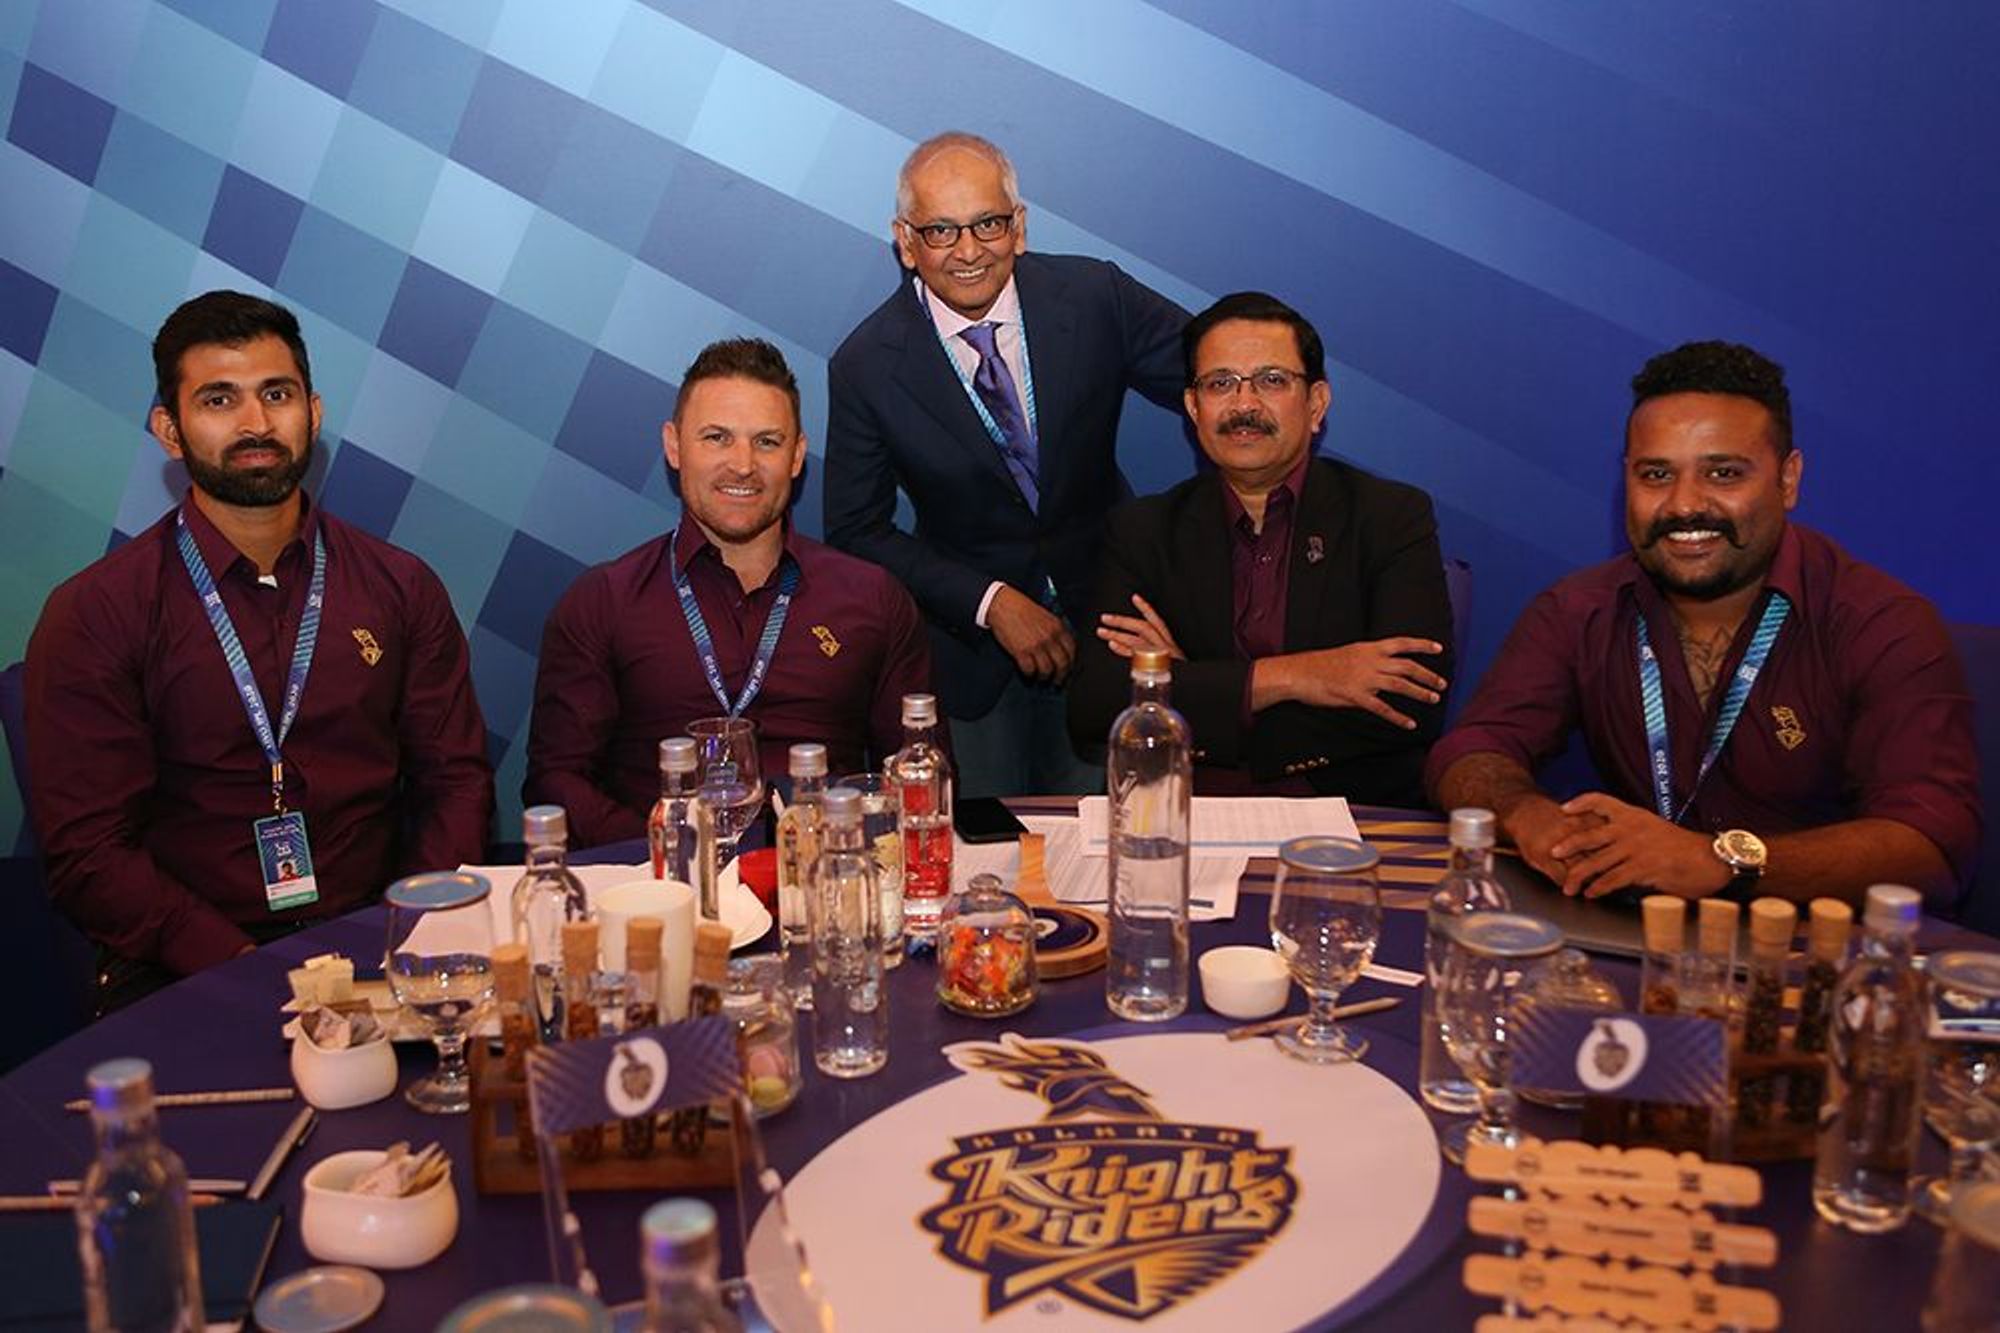 Knight Riders are perhaps the only global brand in cricket, claims Venky Mysore